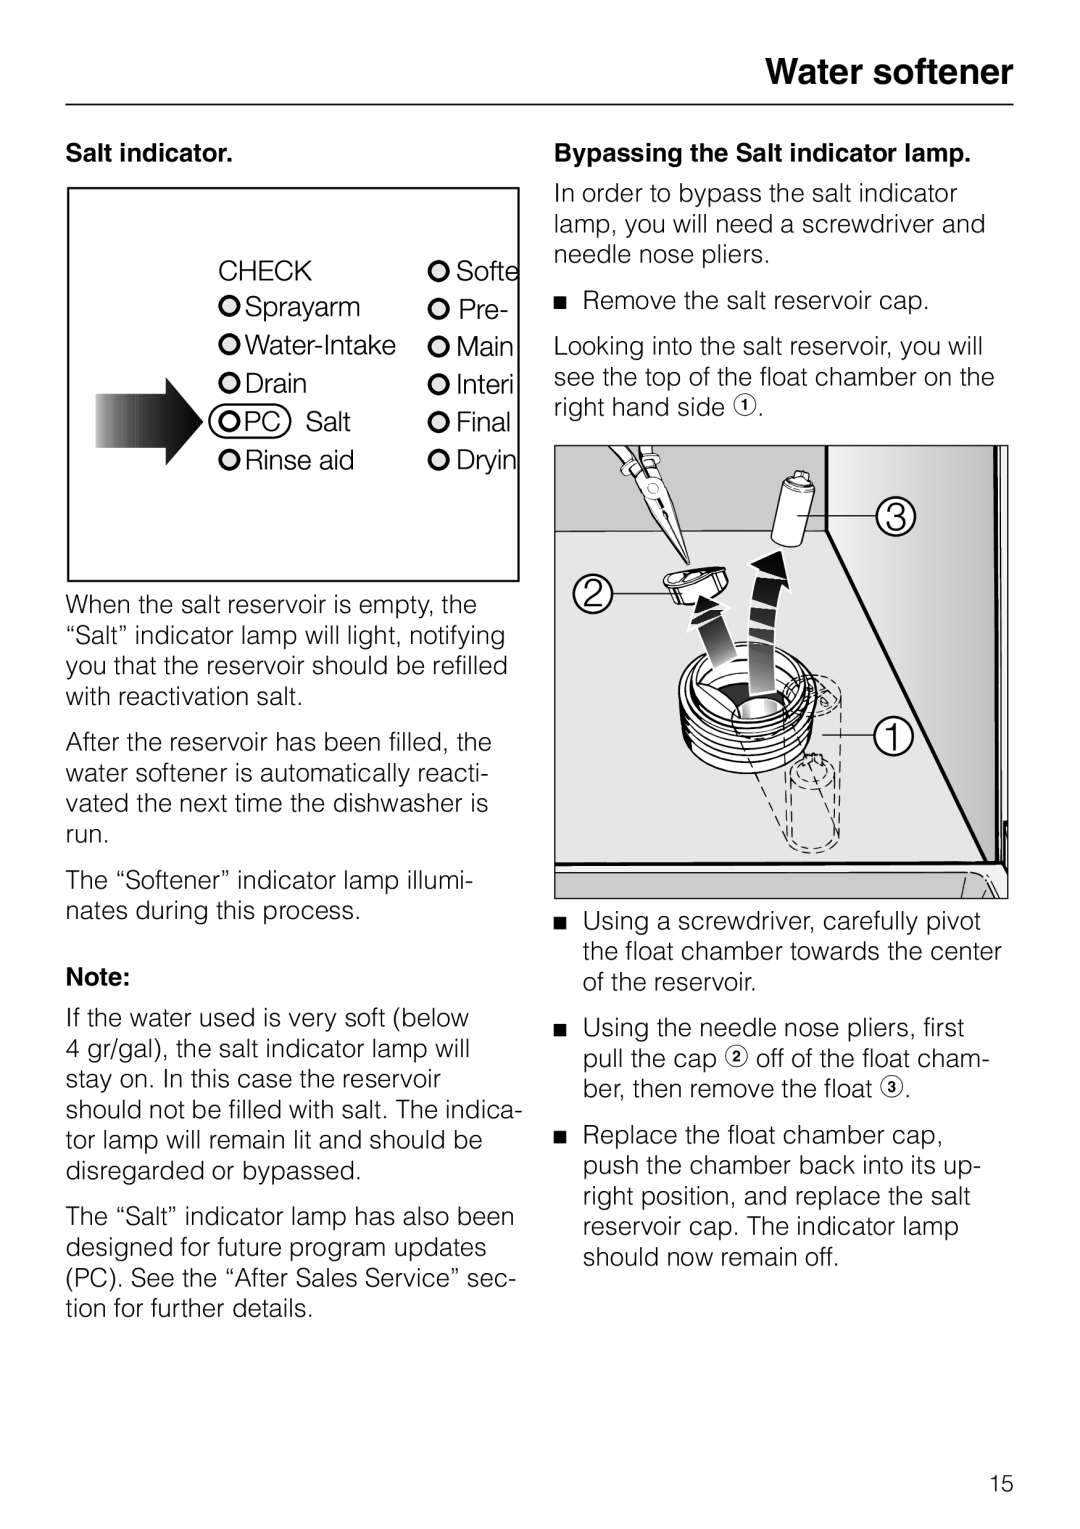 Miele M.-NR. 04 390 922 operating instructions Water softener, Bypassing the Salt indicator lamp 